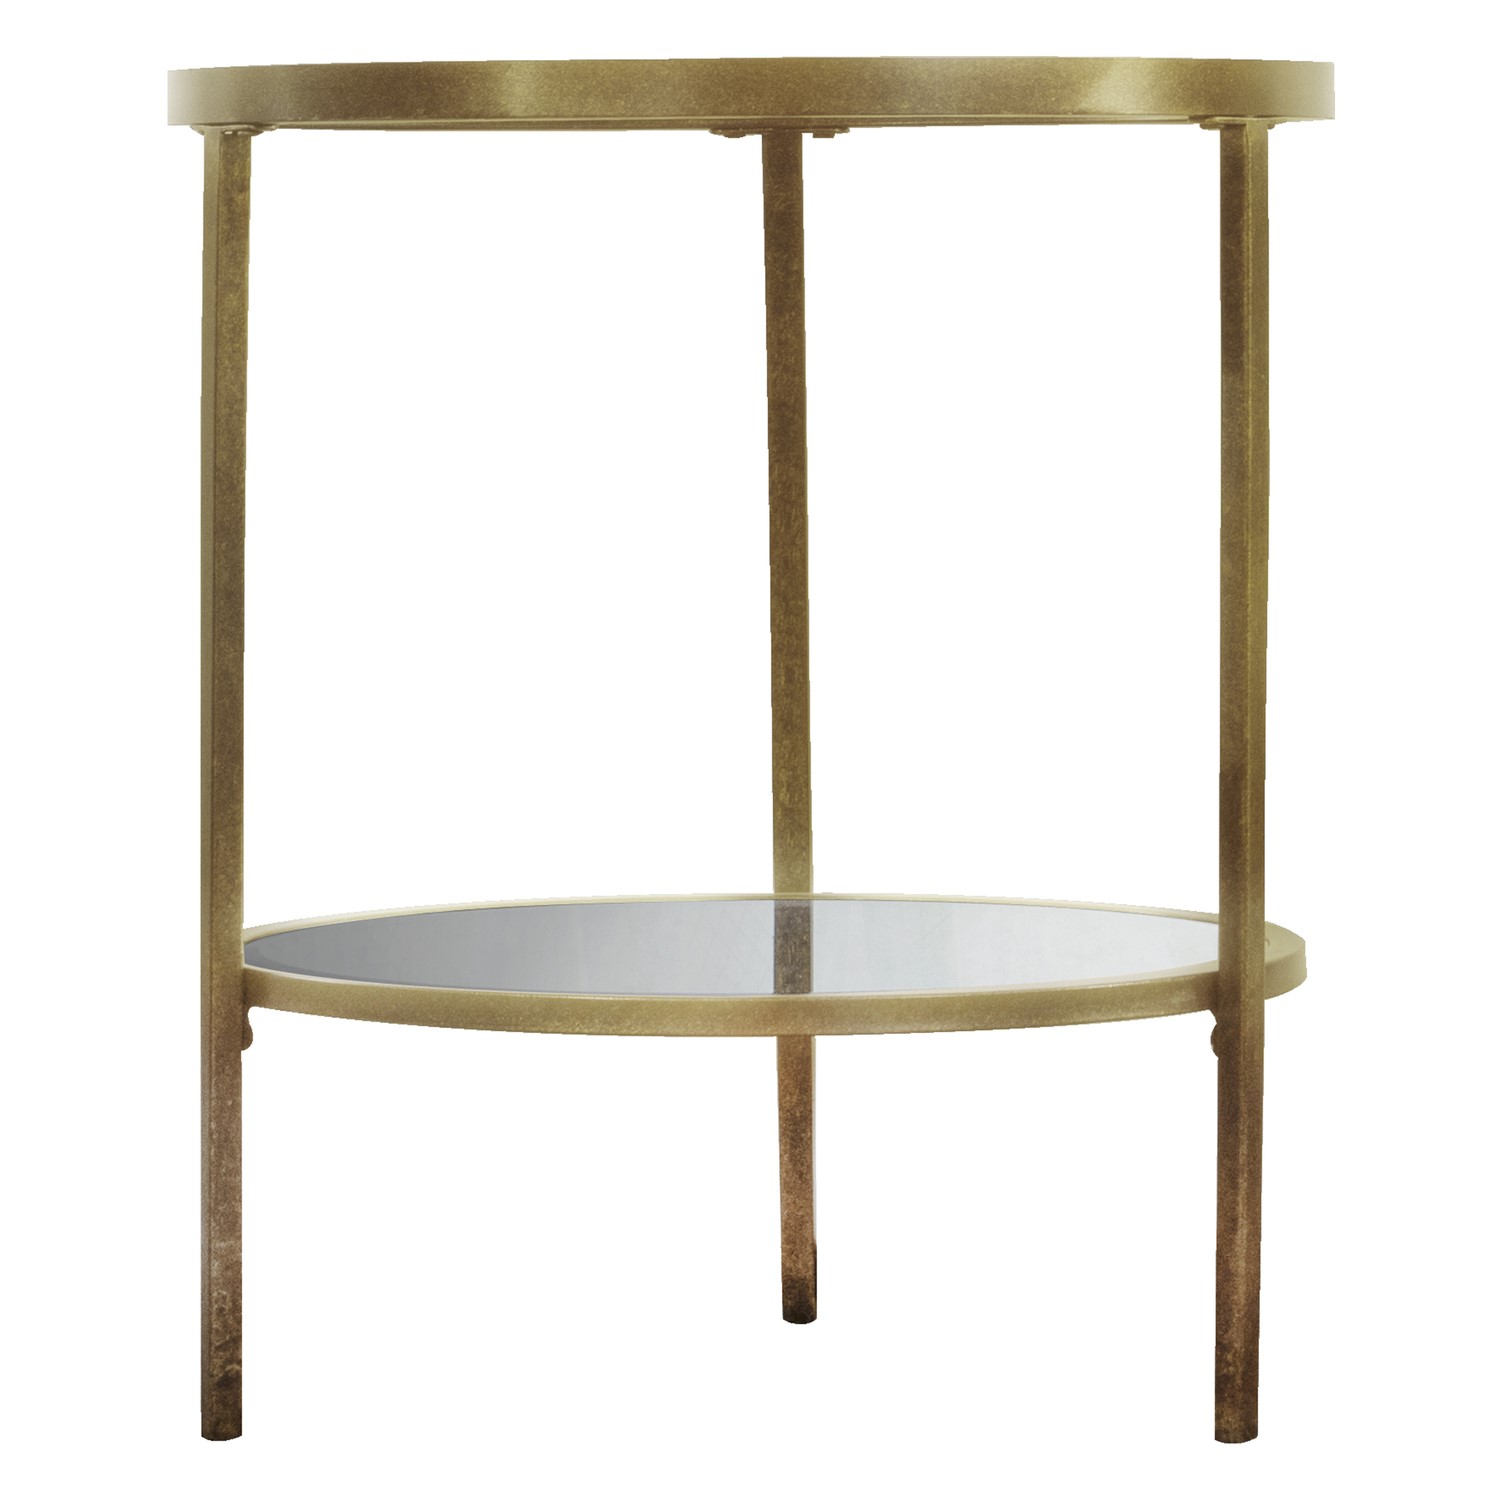 Read more about Hudson glass side table in champagne caspian house